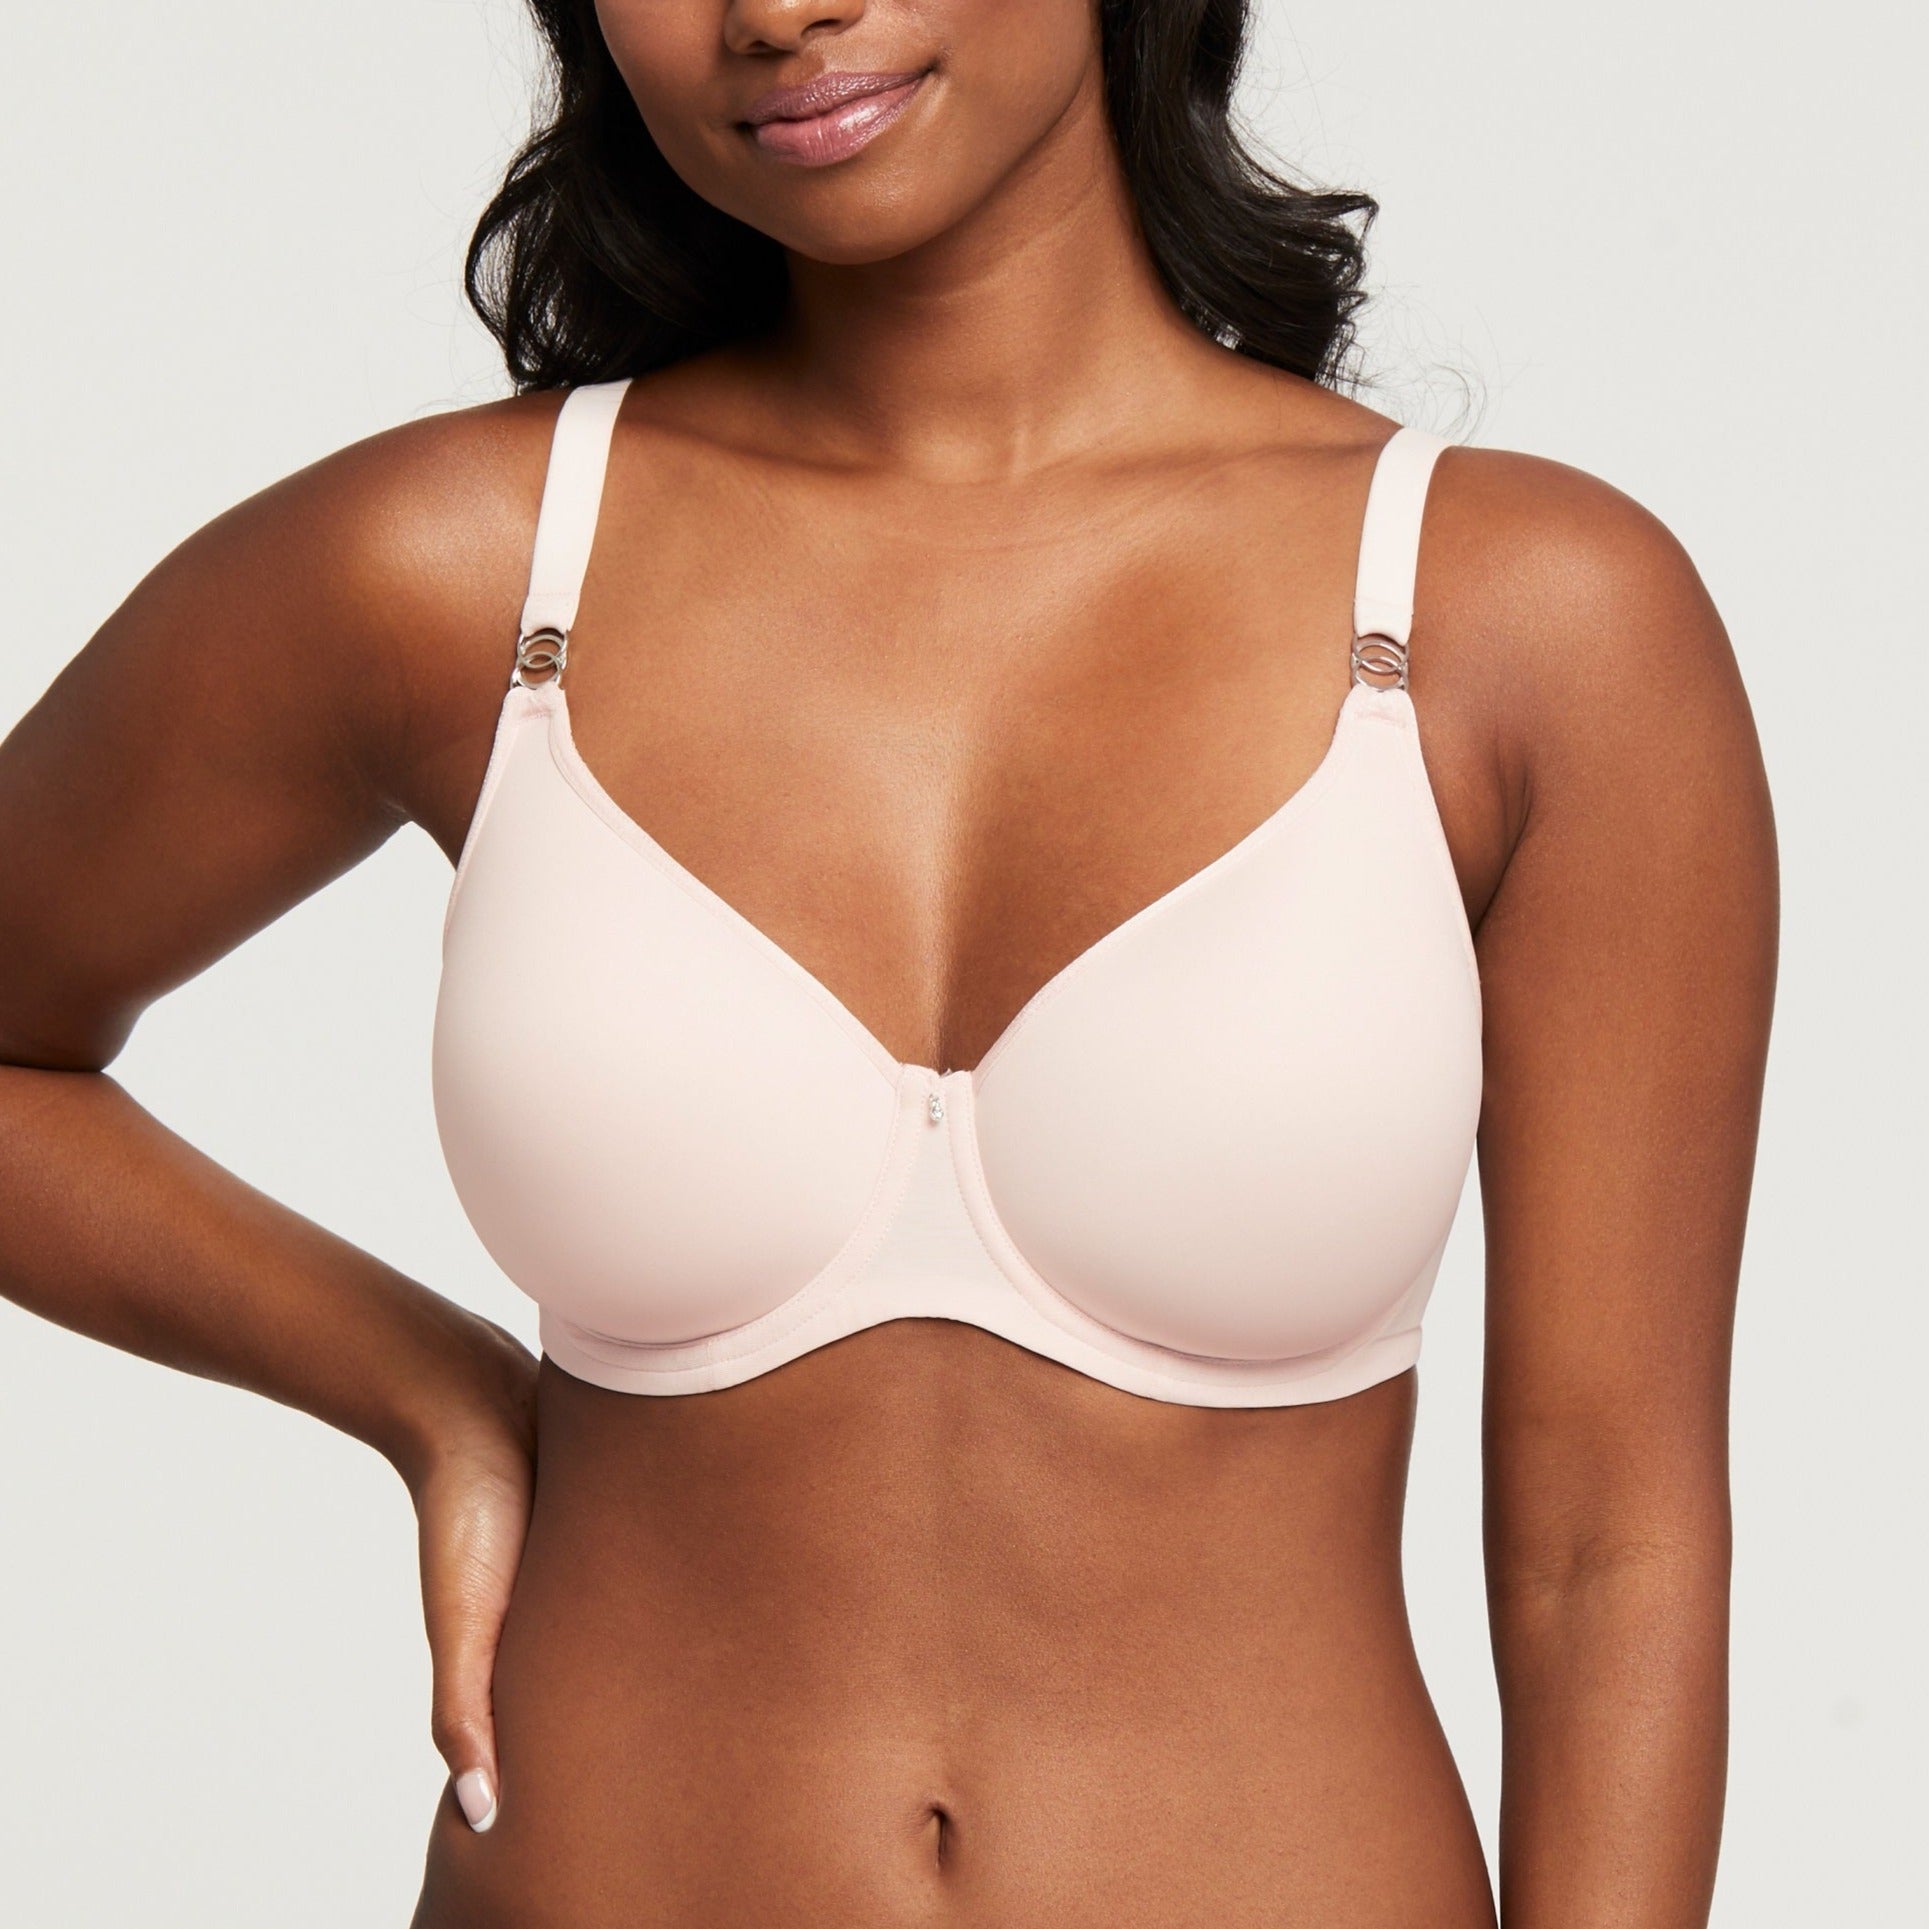 Wholesale is a 36c bra size big For Supportive Underwear 